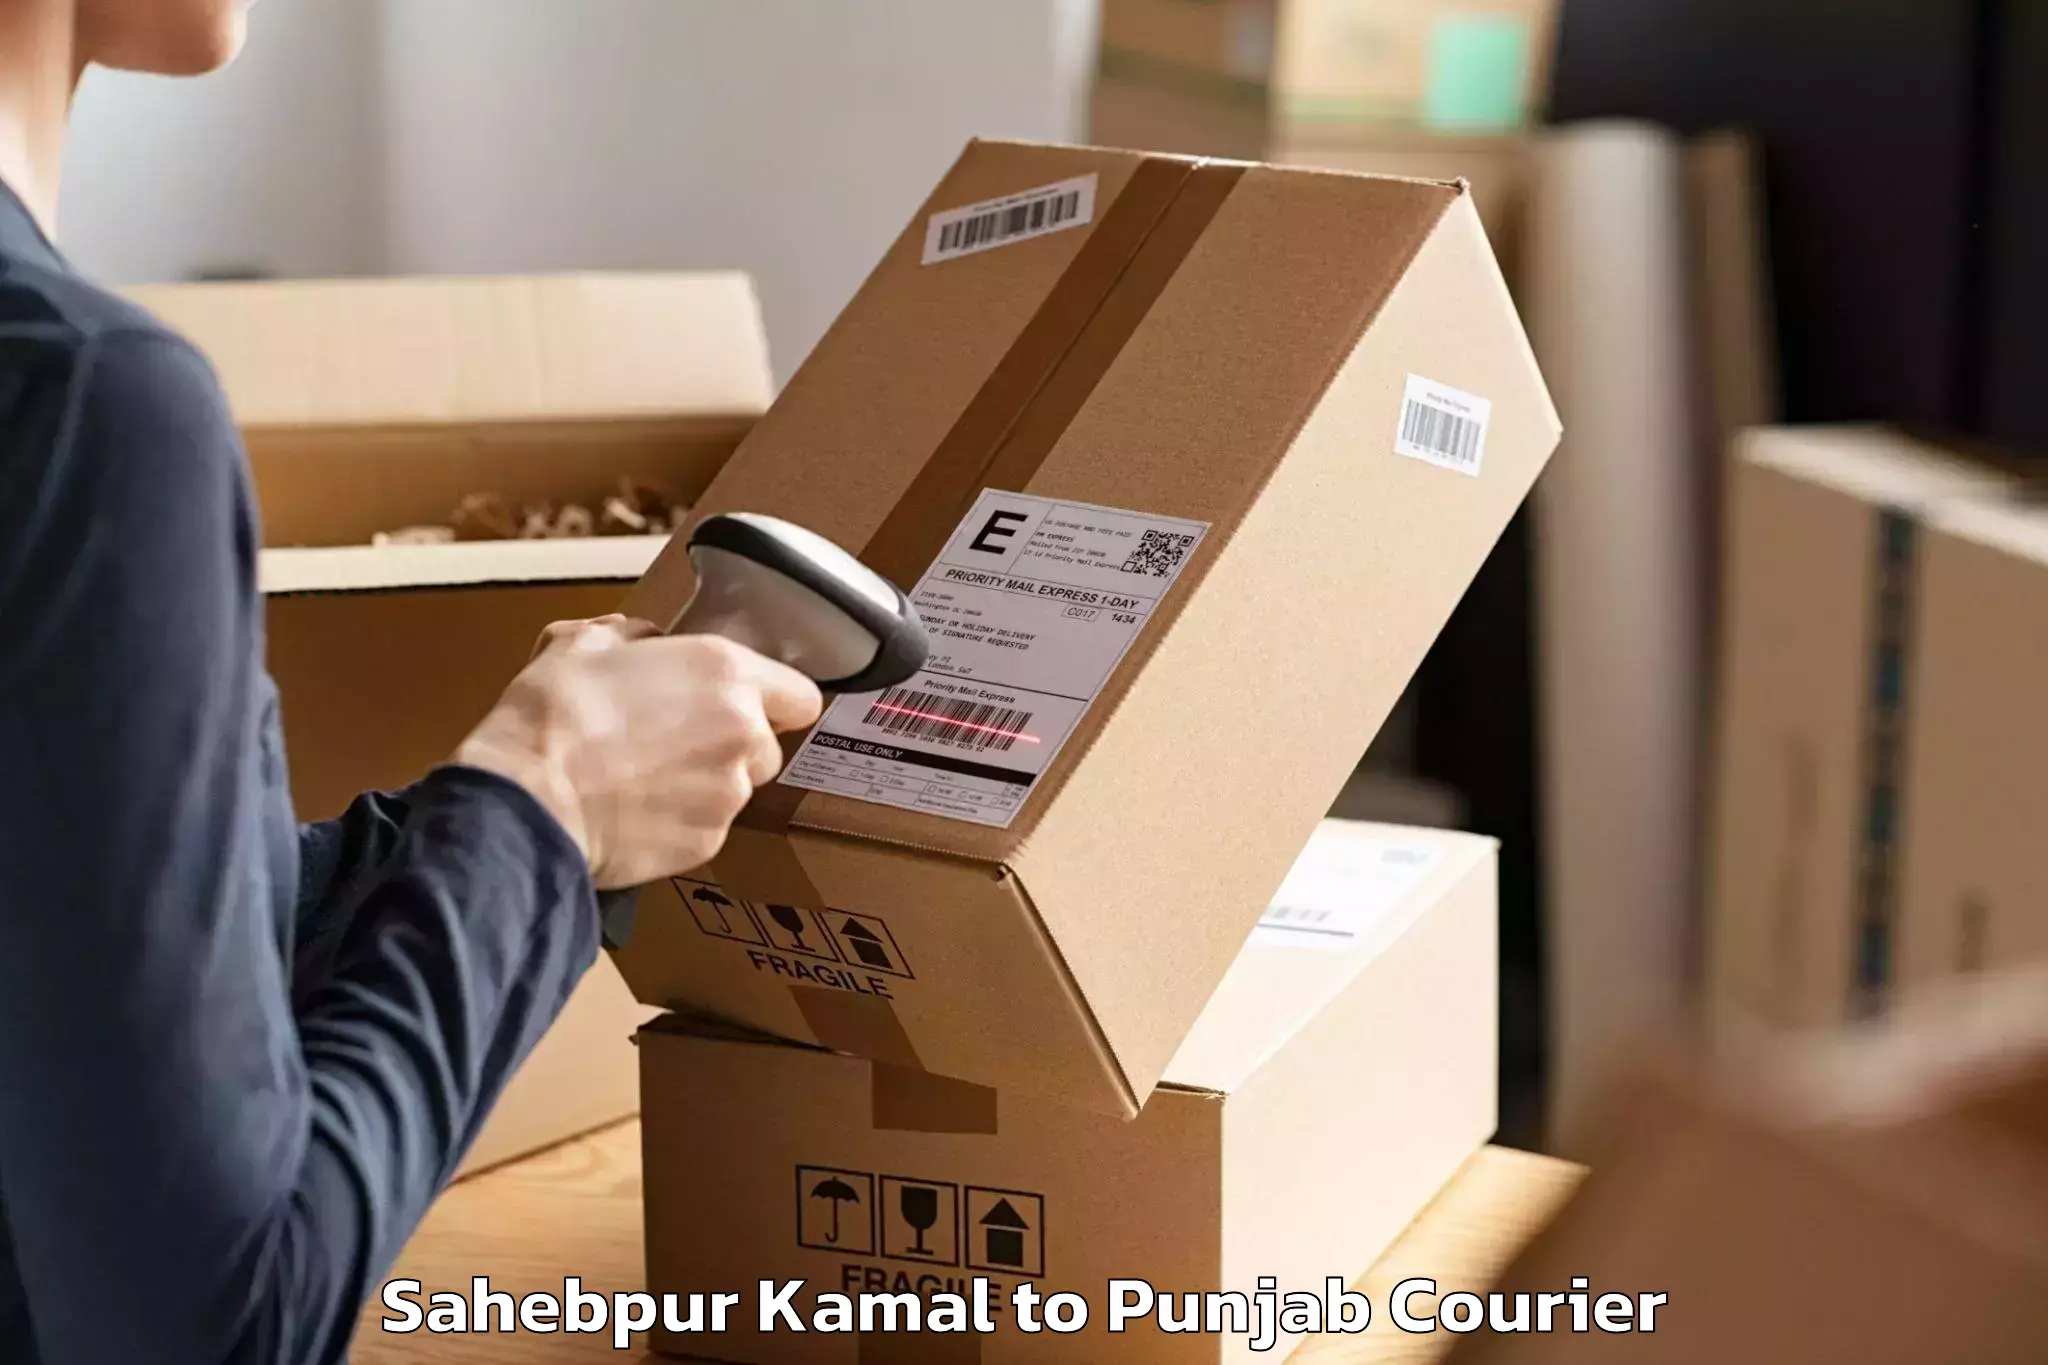 Efficient packing and moving Sahebpur Kamal to Mohali